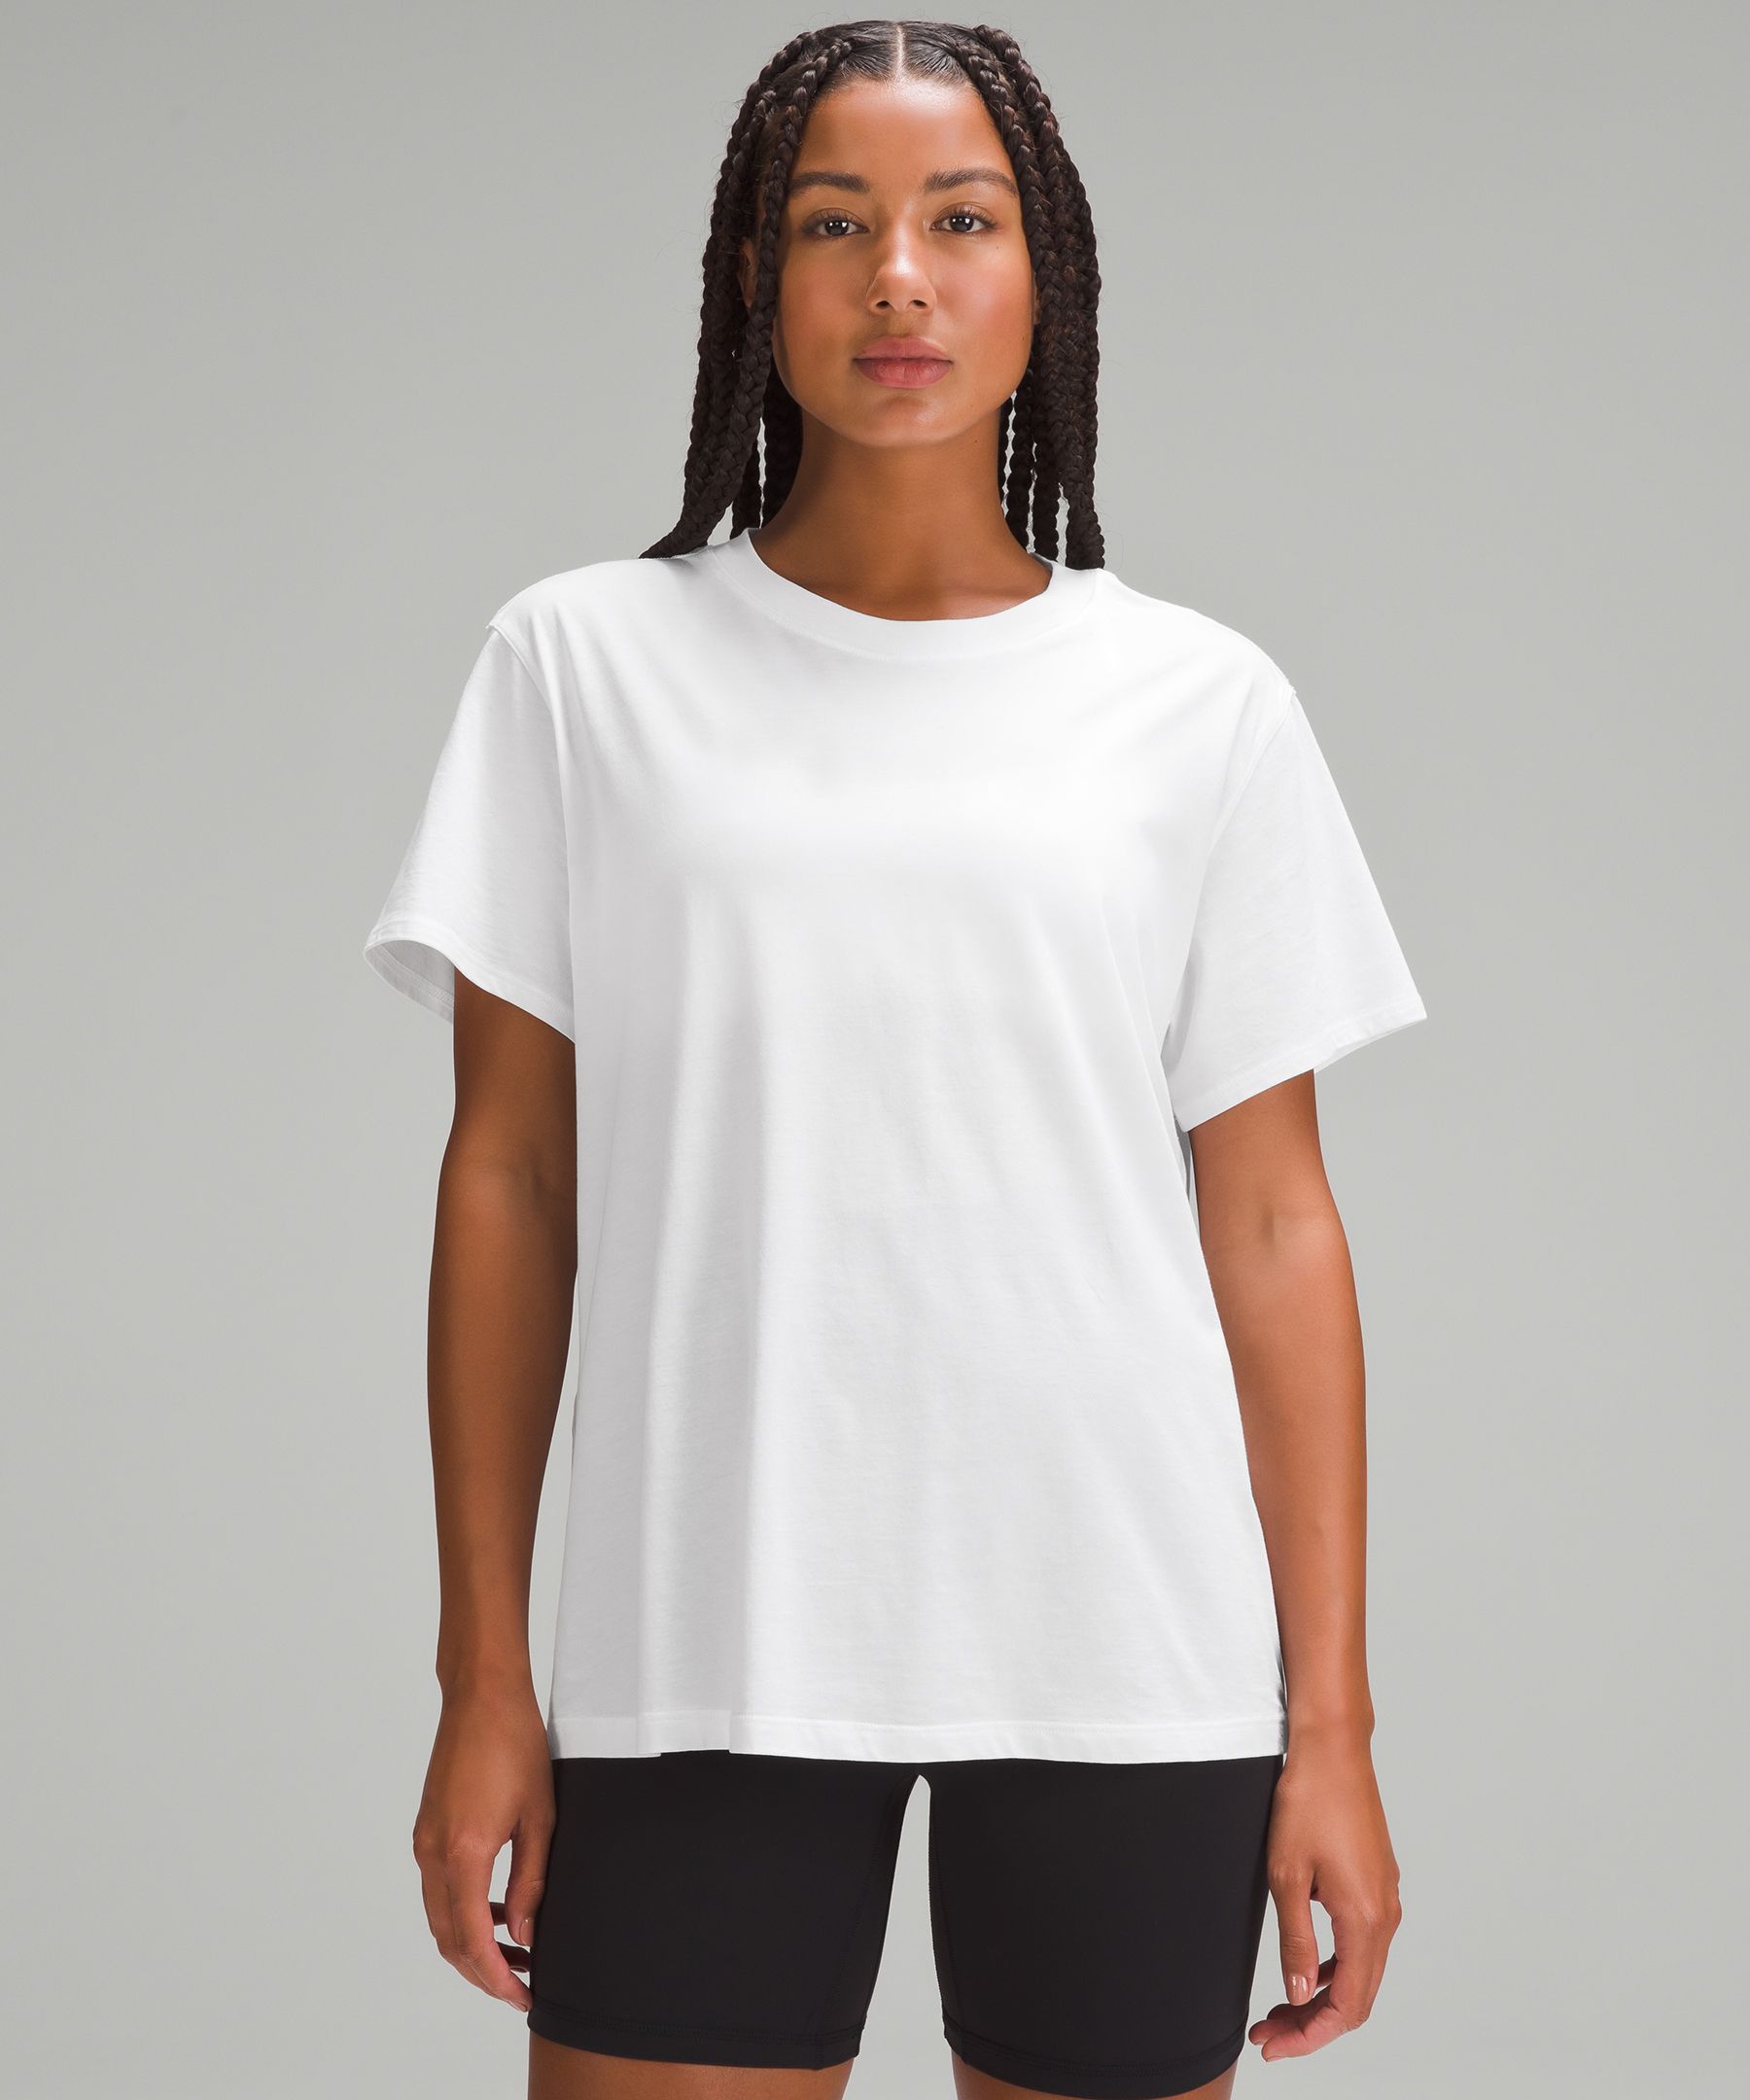 All Yours Cotton T-Shirt  Women's Short Sleeve Shirts & Tee's